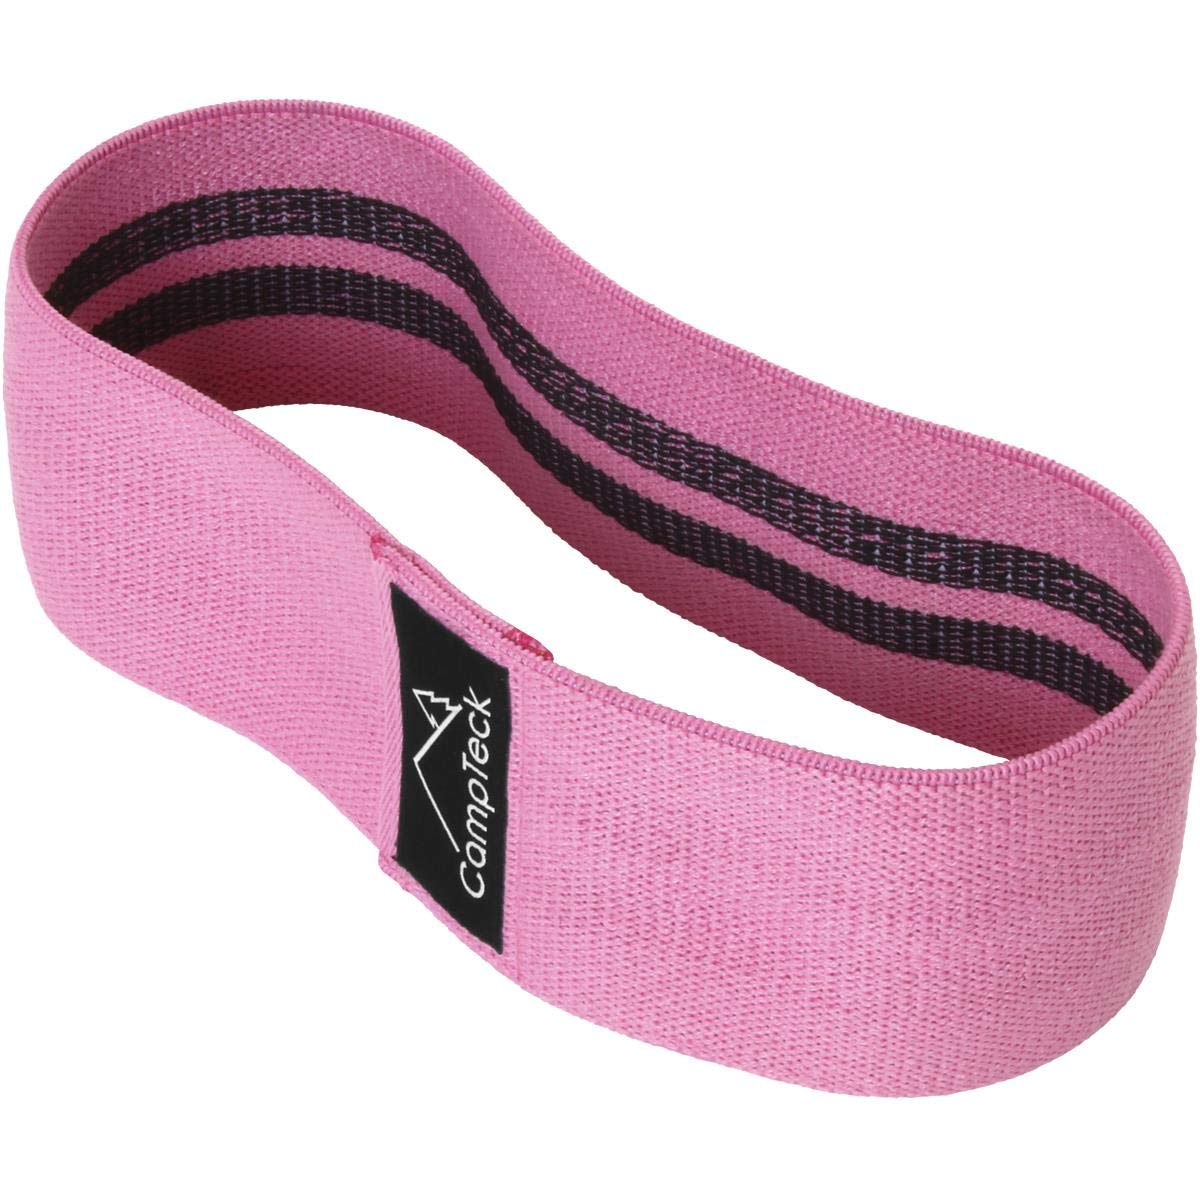 CampTeck Polyester & Latex Hip Band Elasticated Glute Resistance Bands ...